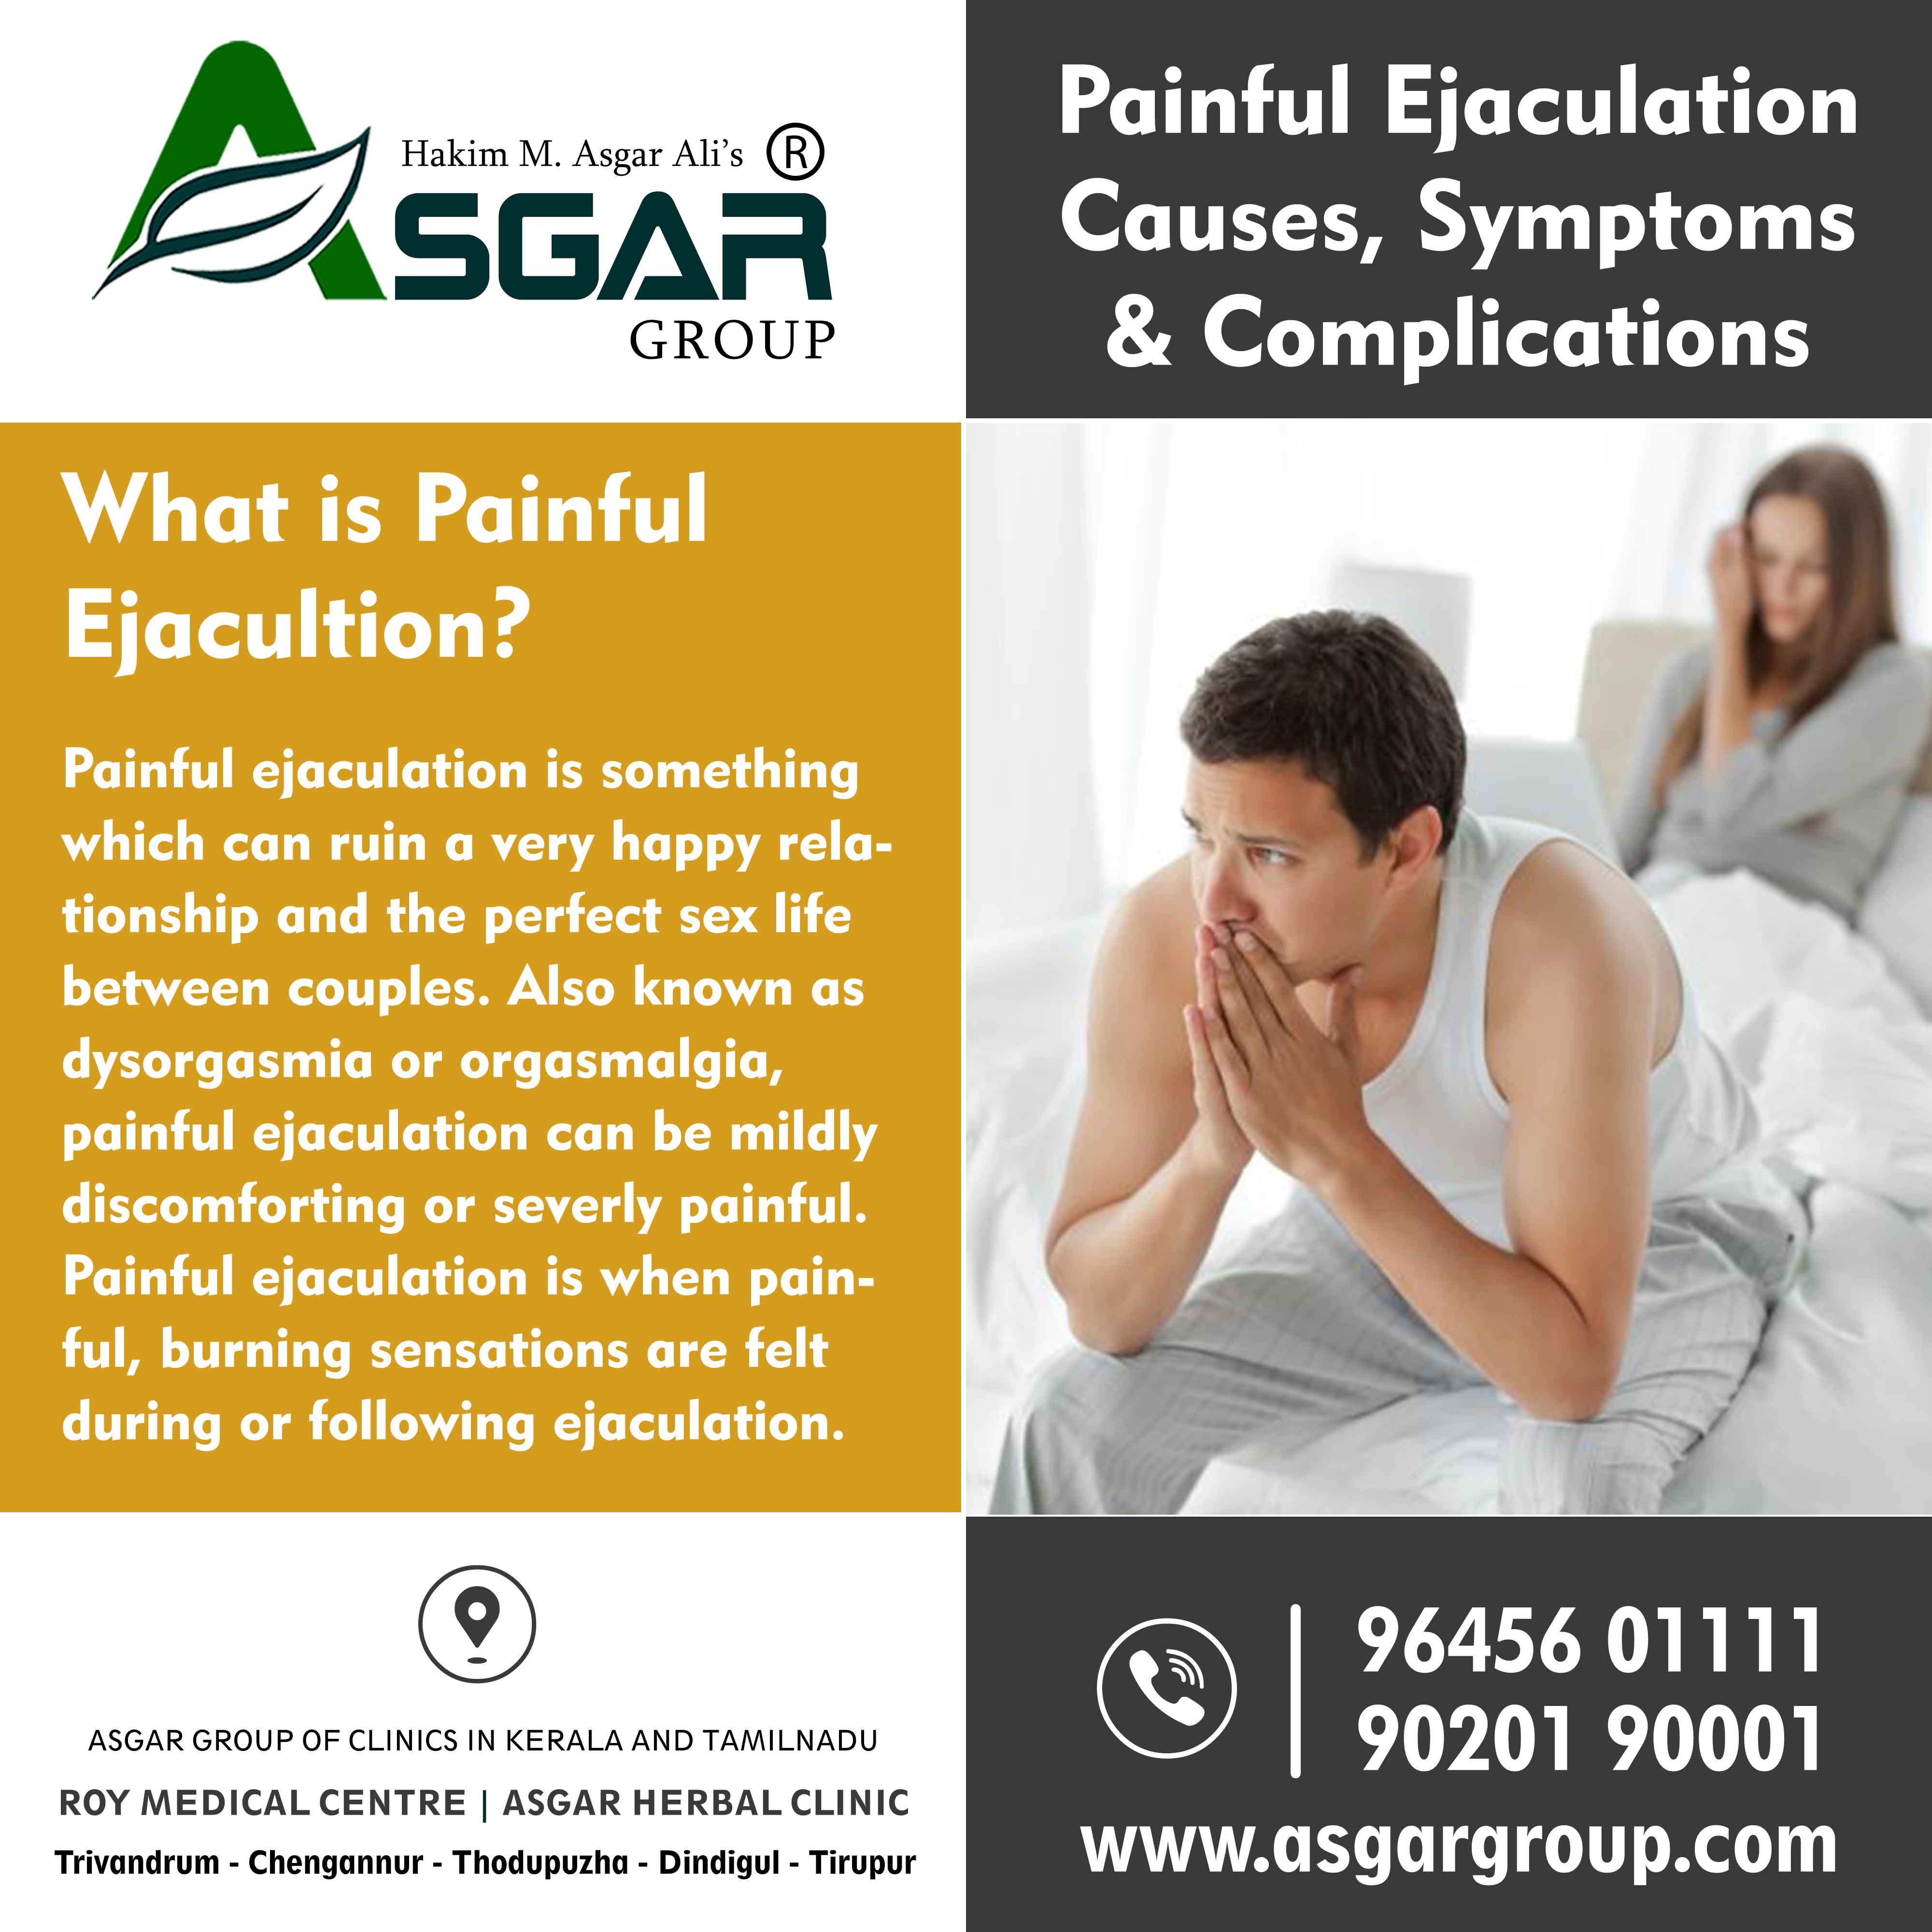 Painful Ejaculation causes symptoms treatment roy medical centre sexologist in india asgar group